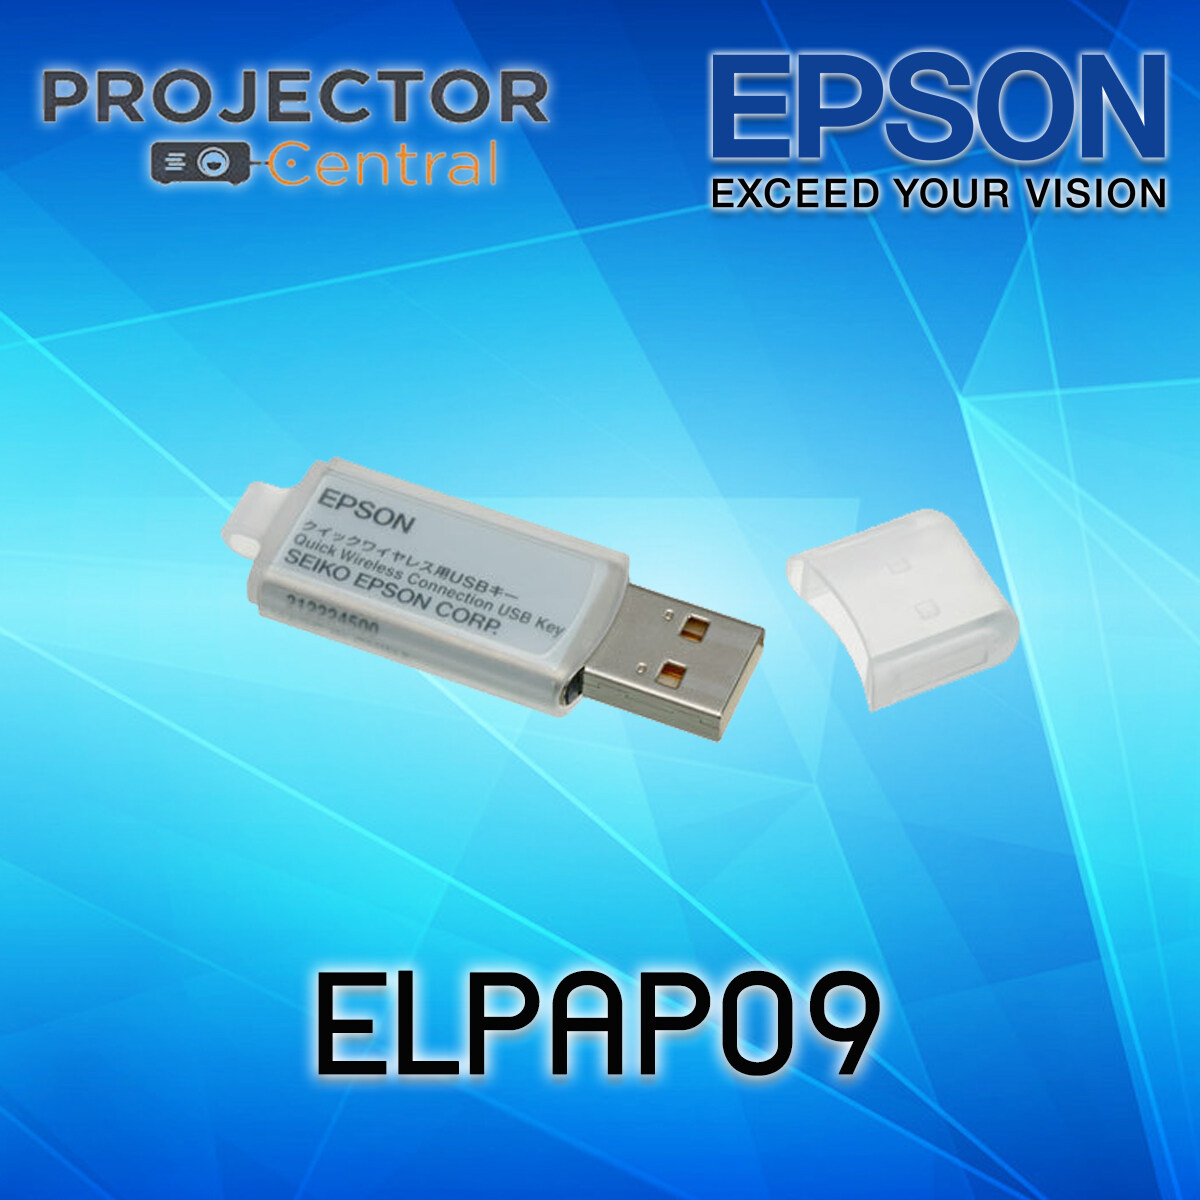 Epson Quick Wireless Connection USB ELPAP09 | Lazada.co.th